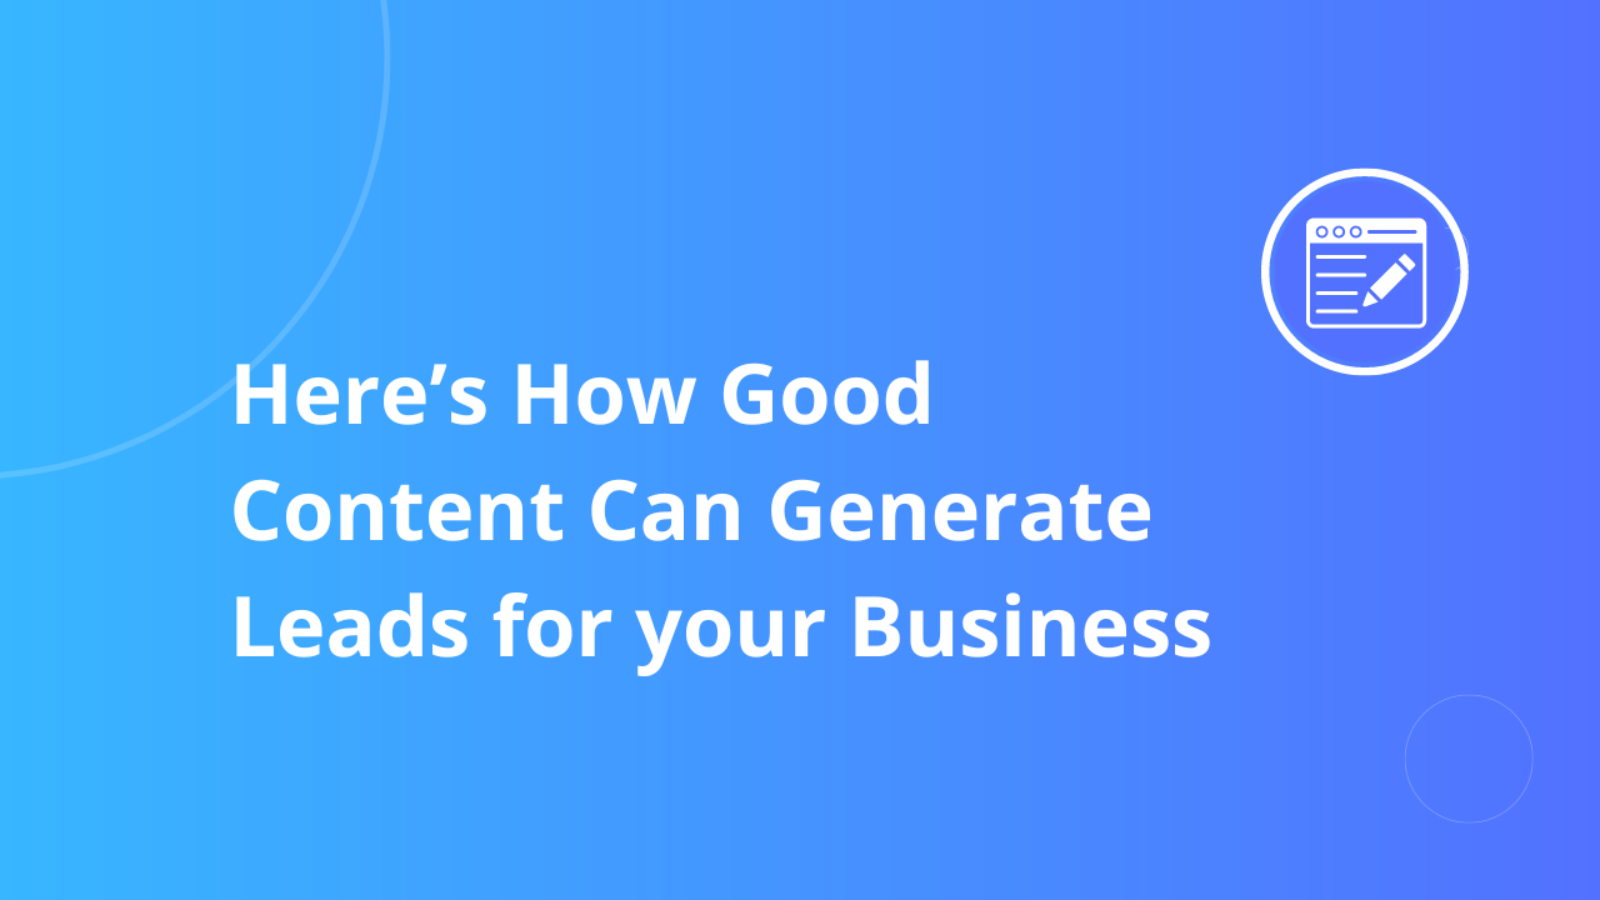 Here’s How Good Content Can Generate Leads for your Business